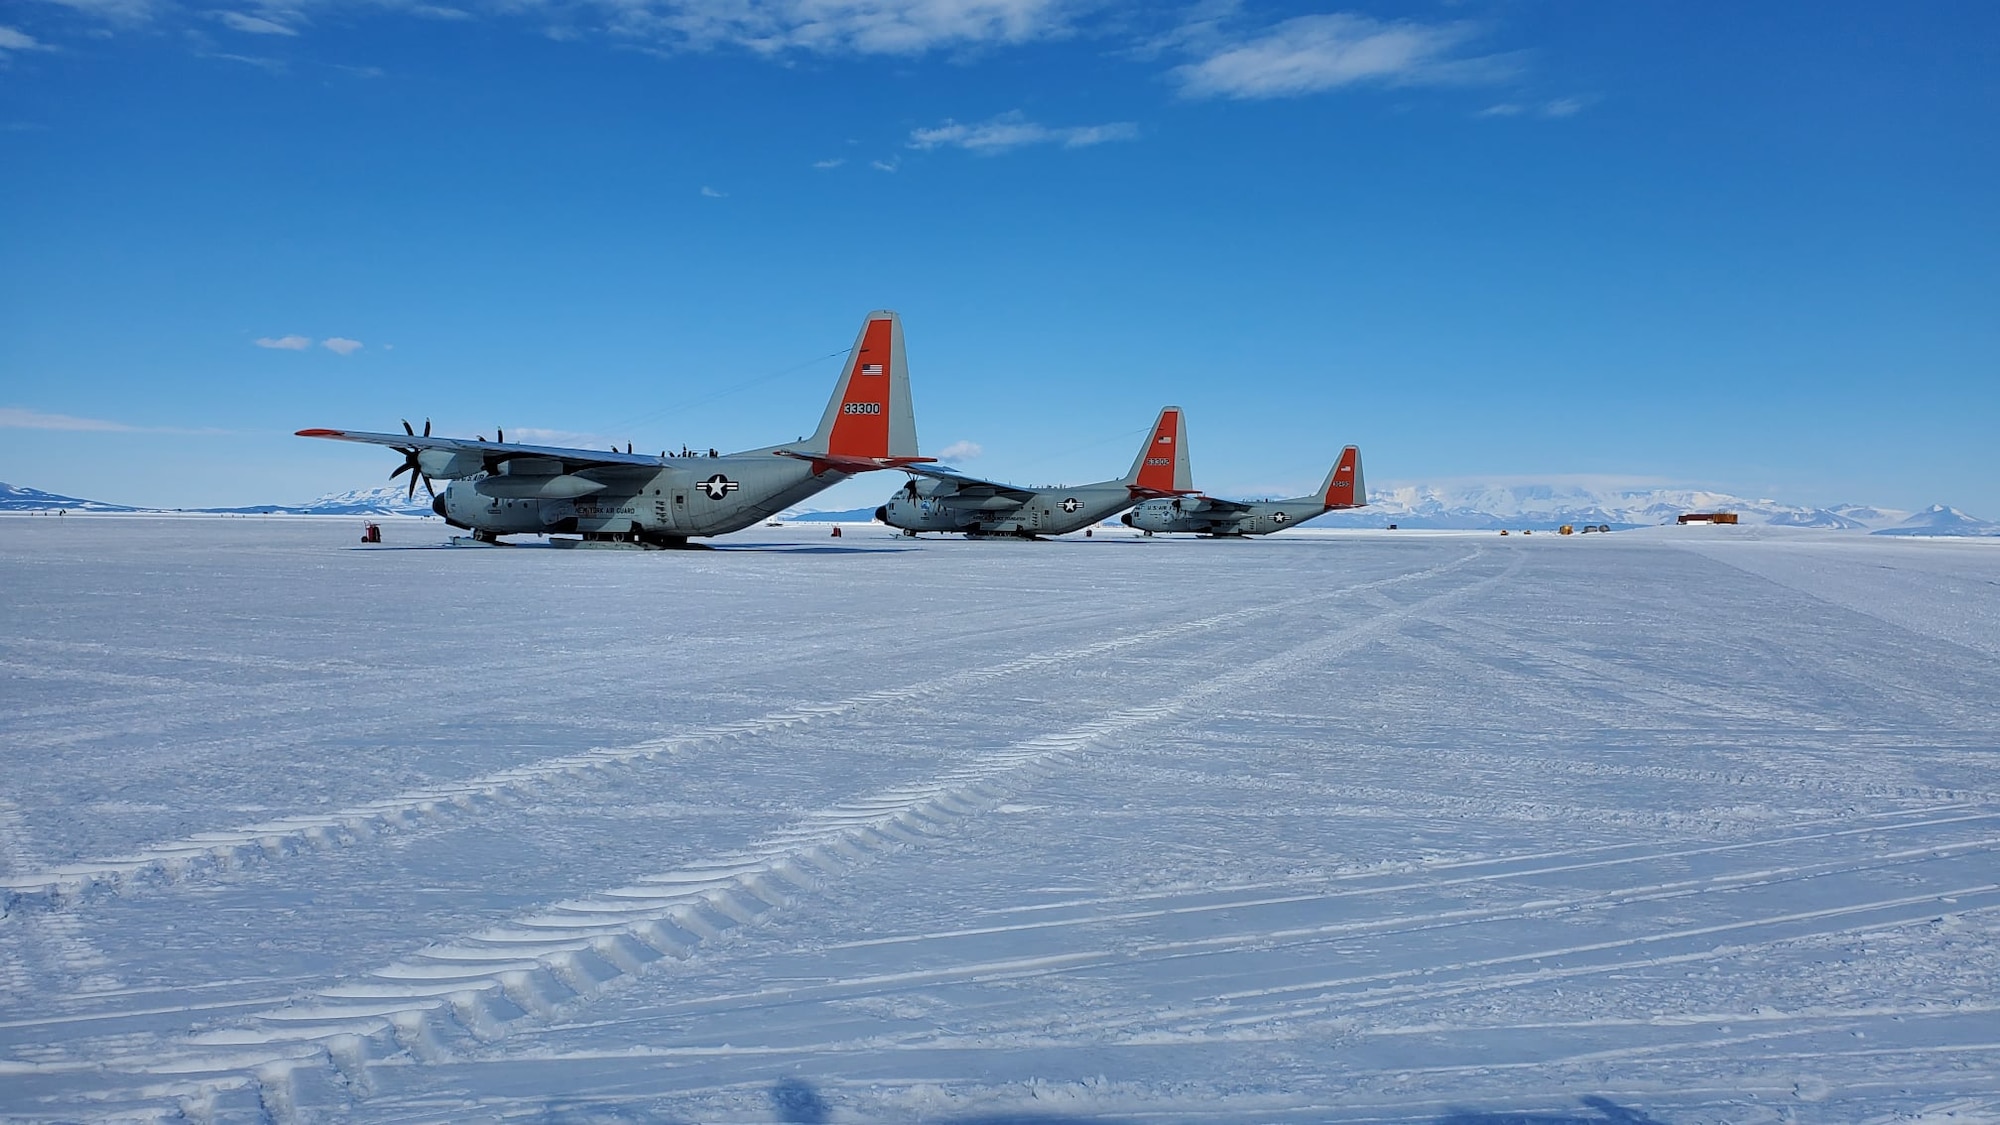 Three LC-130 aircraft sit on the flightline during Operation Deep Freeze at McMurdo Research Station (Williams Field), Antarctica, in 2021.